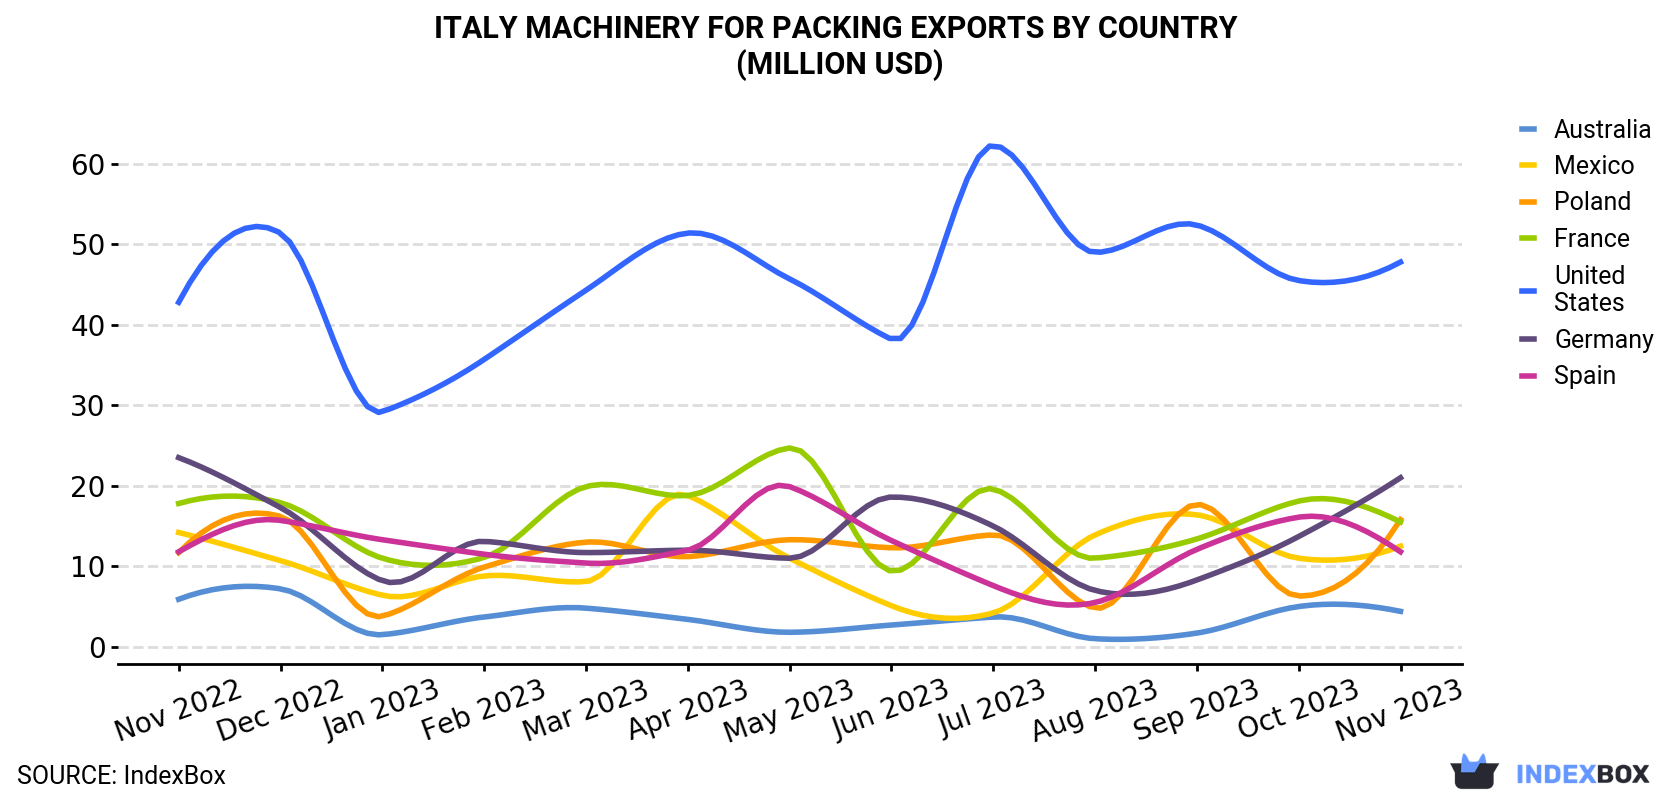 Italy Machinery For Packing Exports By Country (Million USD)